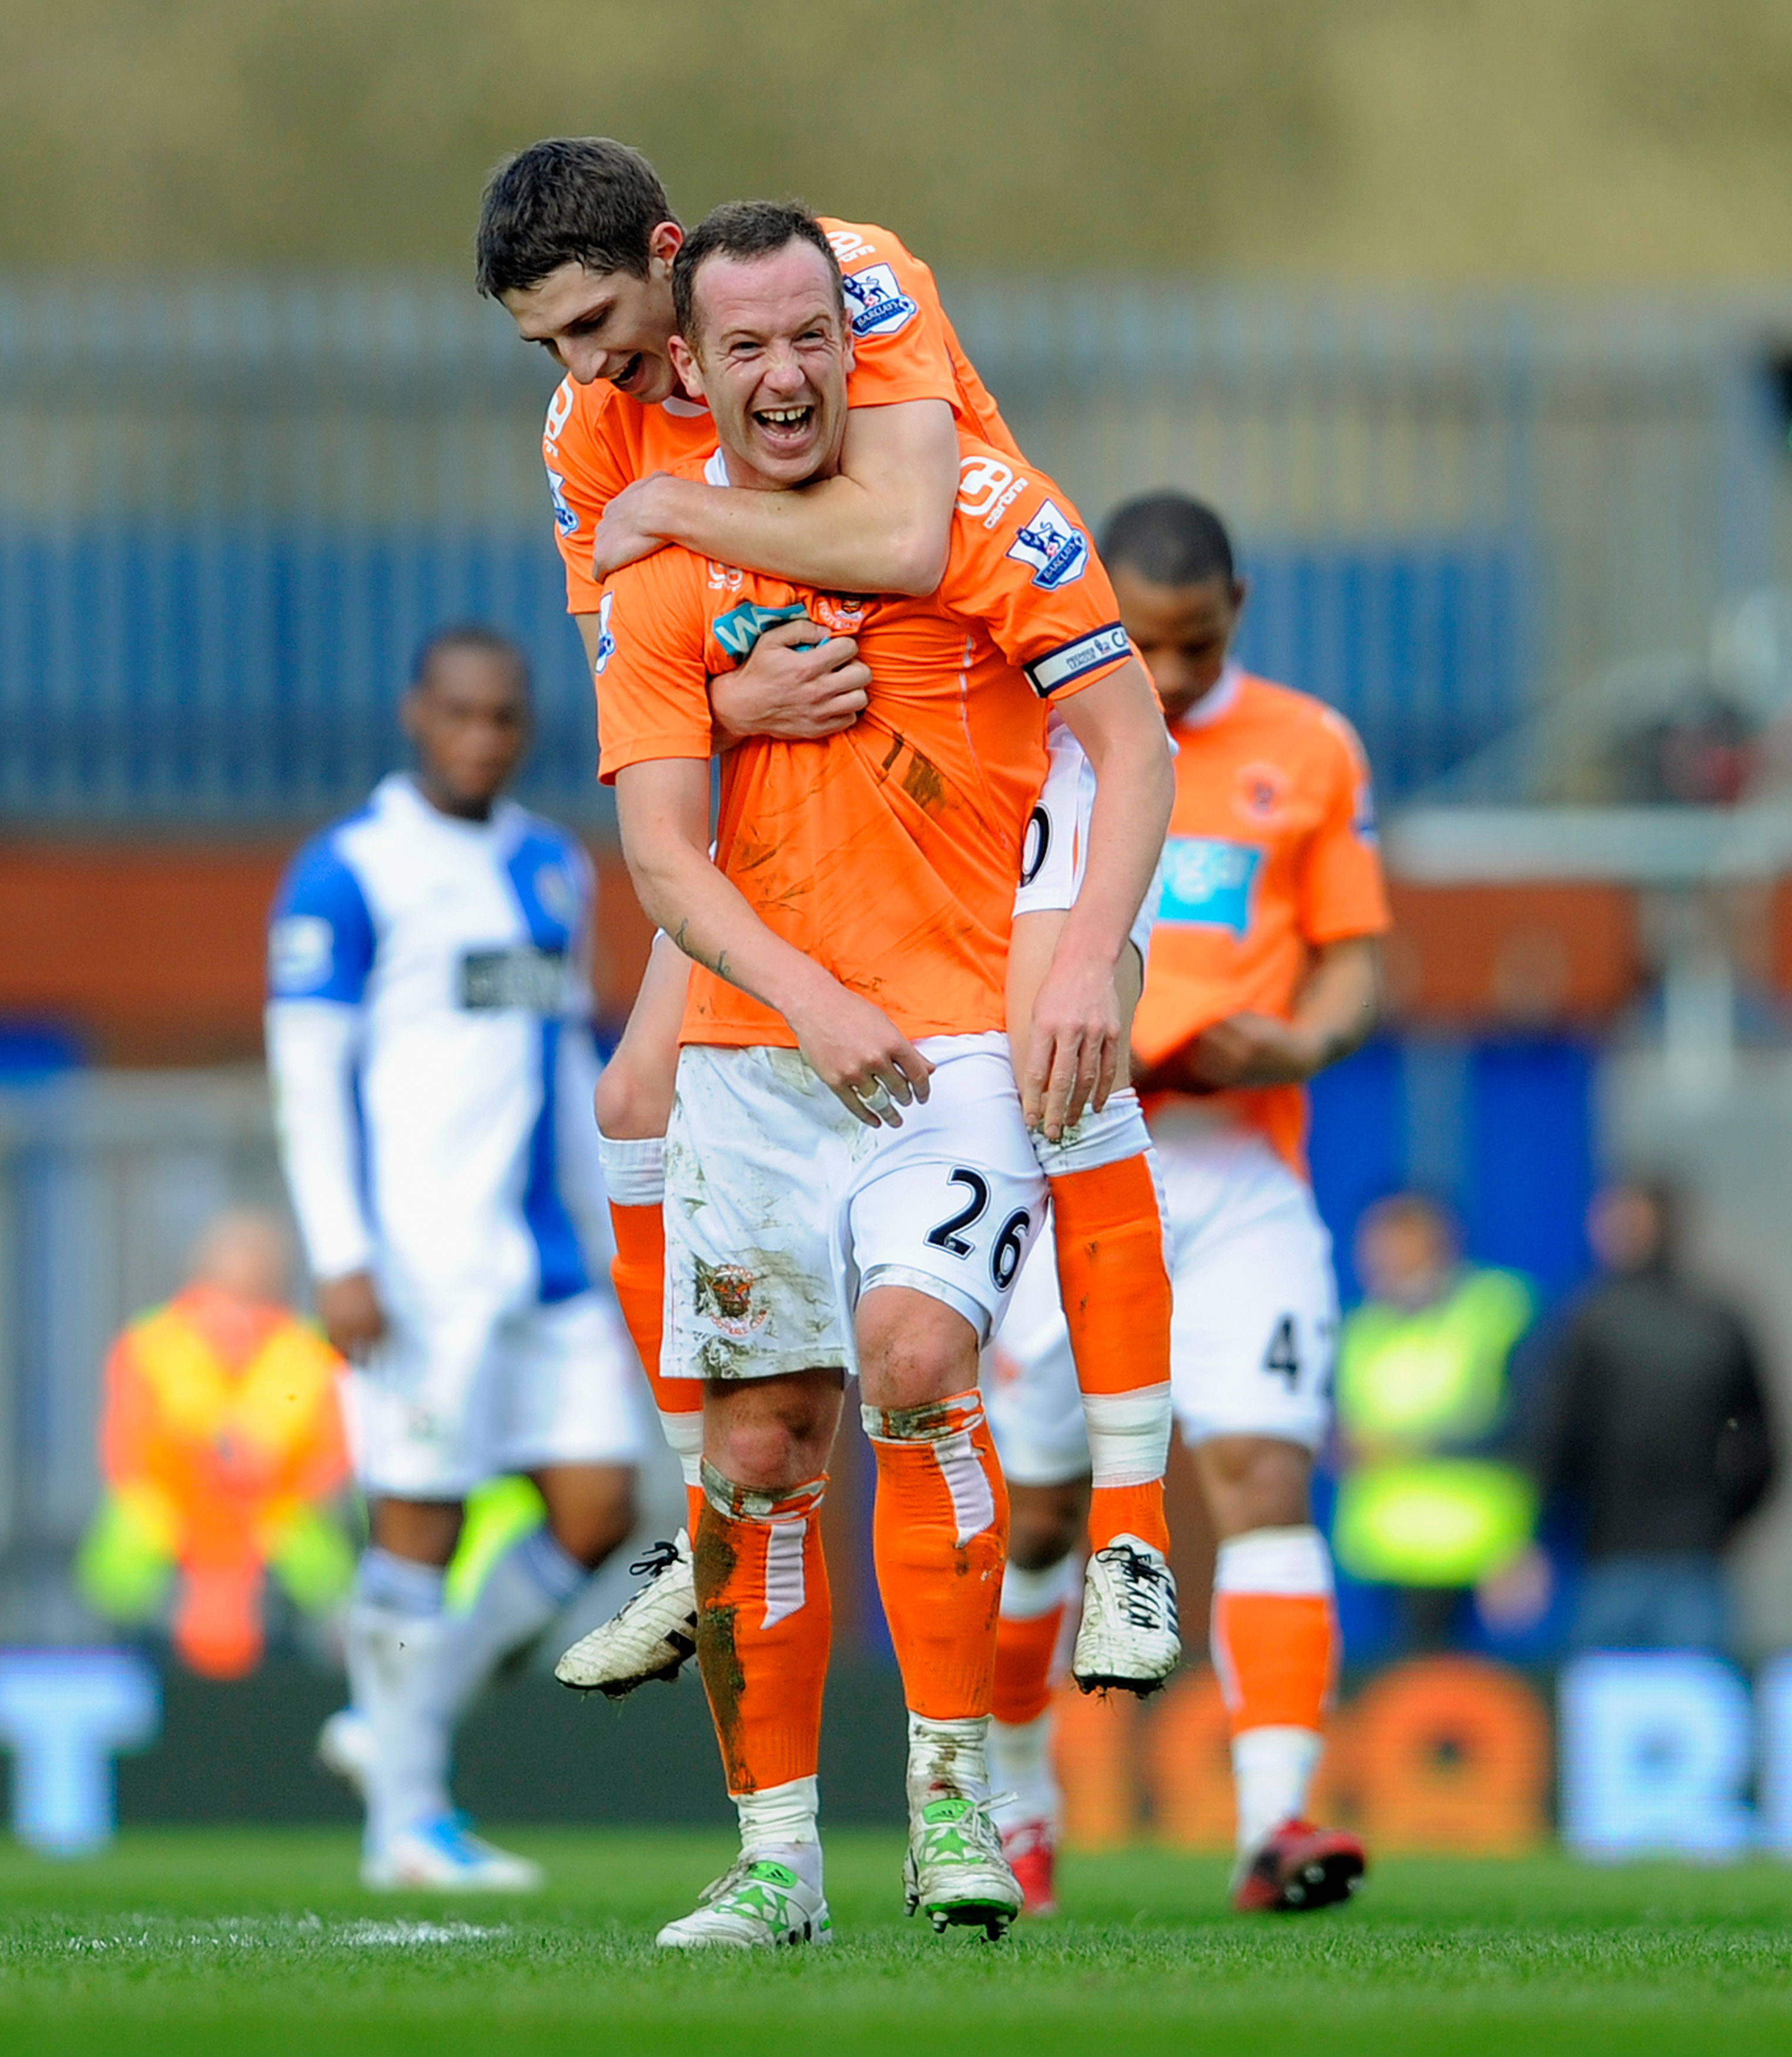 BLACKBURN, ENGLAND - MARCH 19: Charlie Adam of Blackpool celebrates with Craig Cathcart after scoring to make it 2-0 during the Barclays Premier League match between Blackburn Rovers and Blackpool at Ewood Park on March 19, 2011 in Blackburn, England.  (P